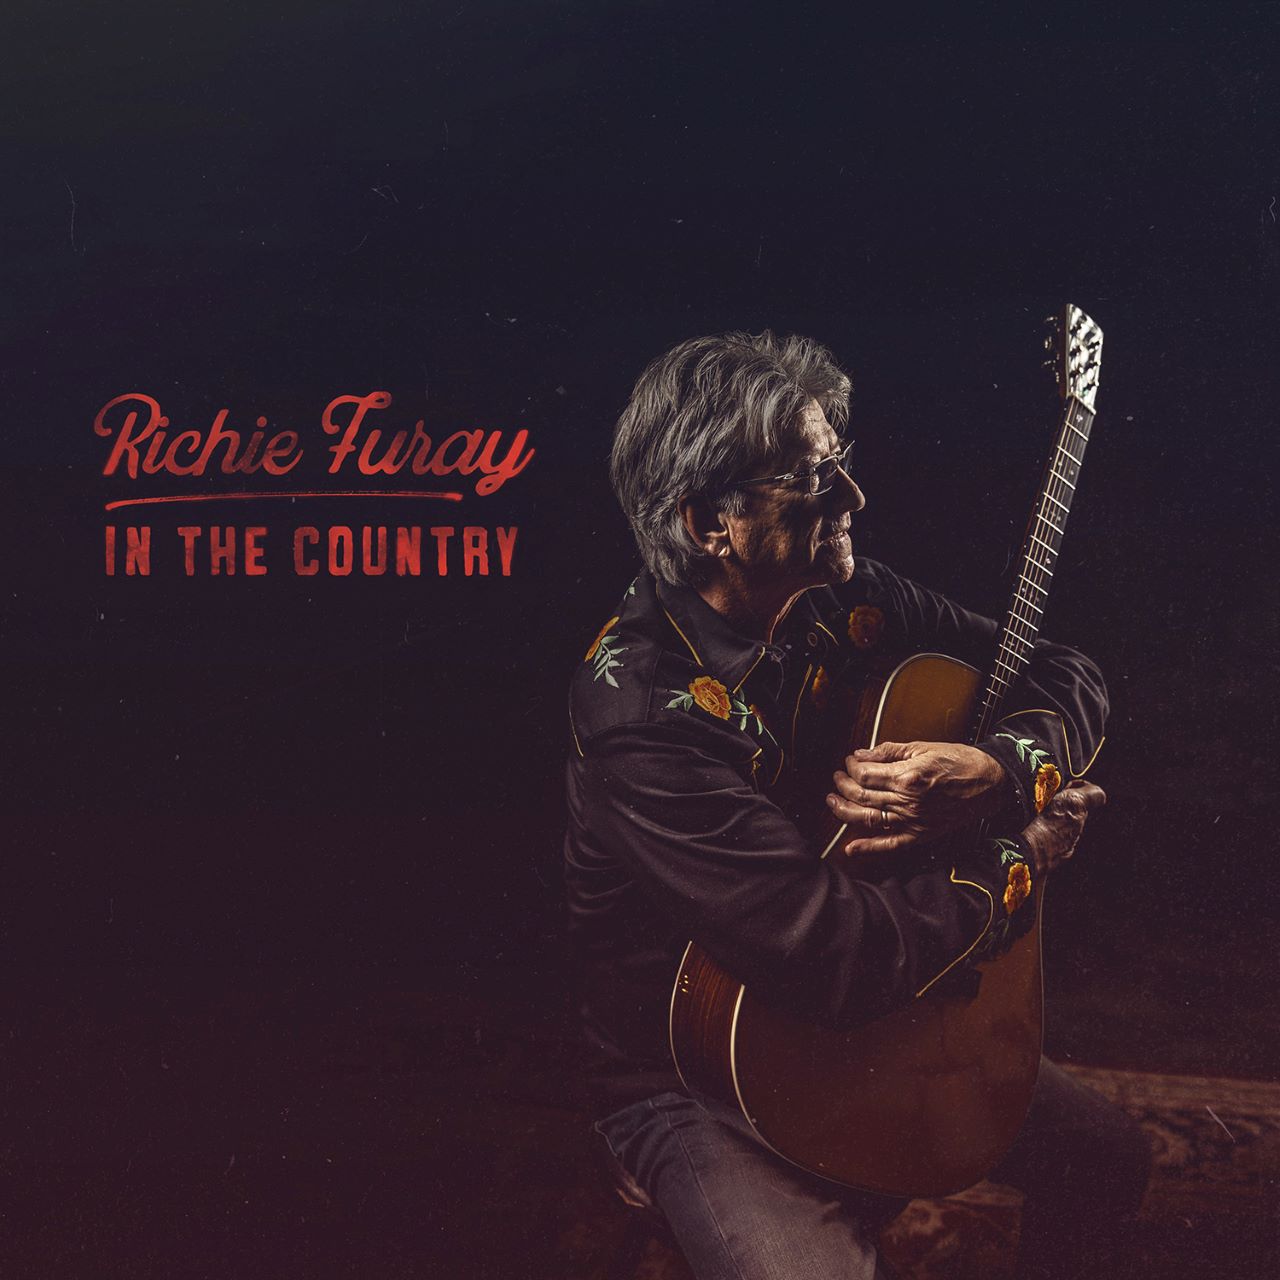 Richie Furay - In The Country cover album news